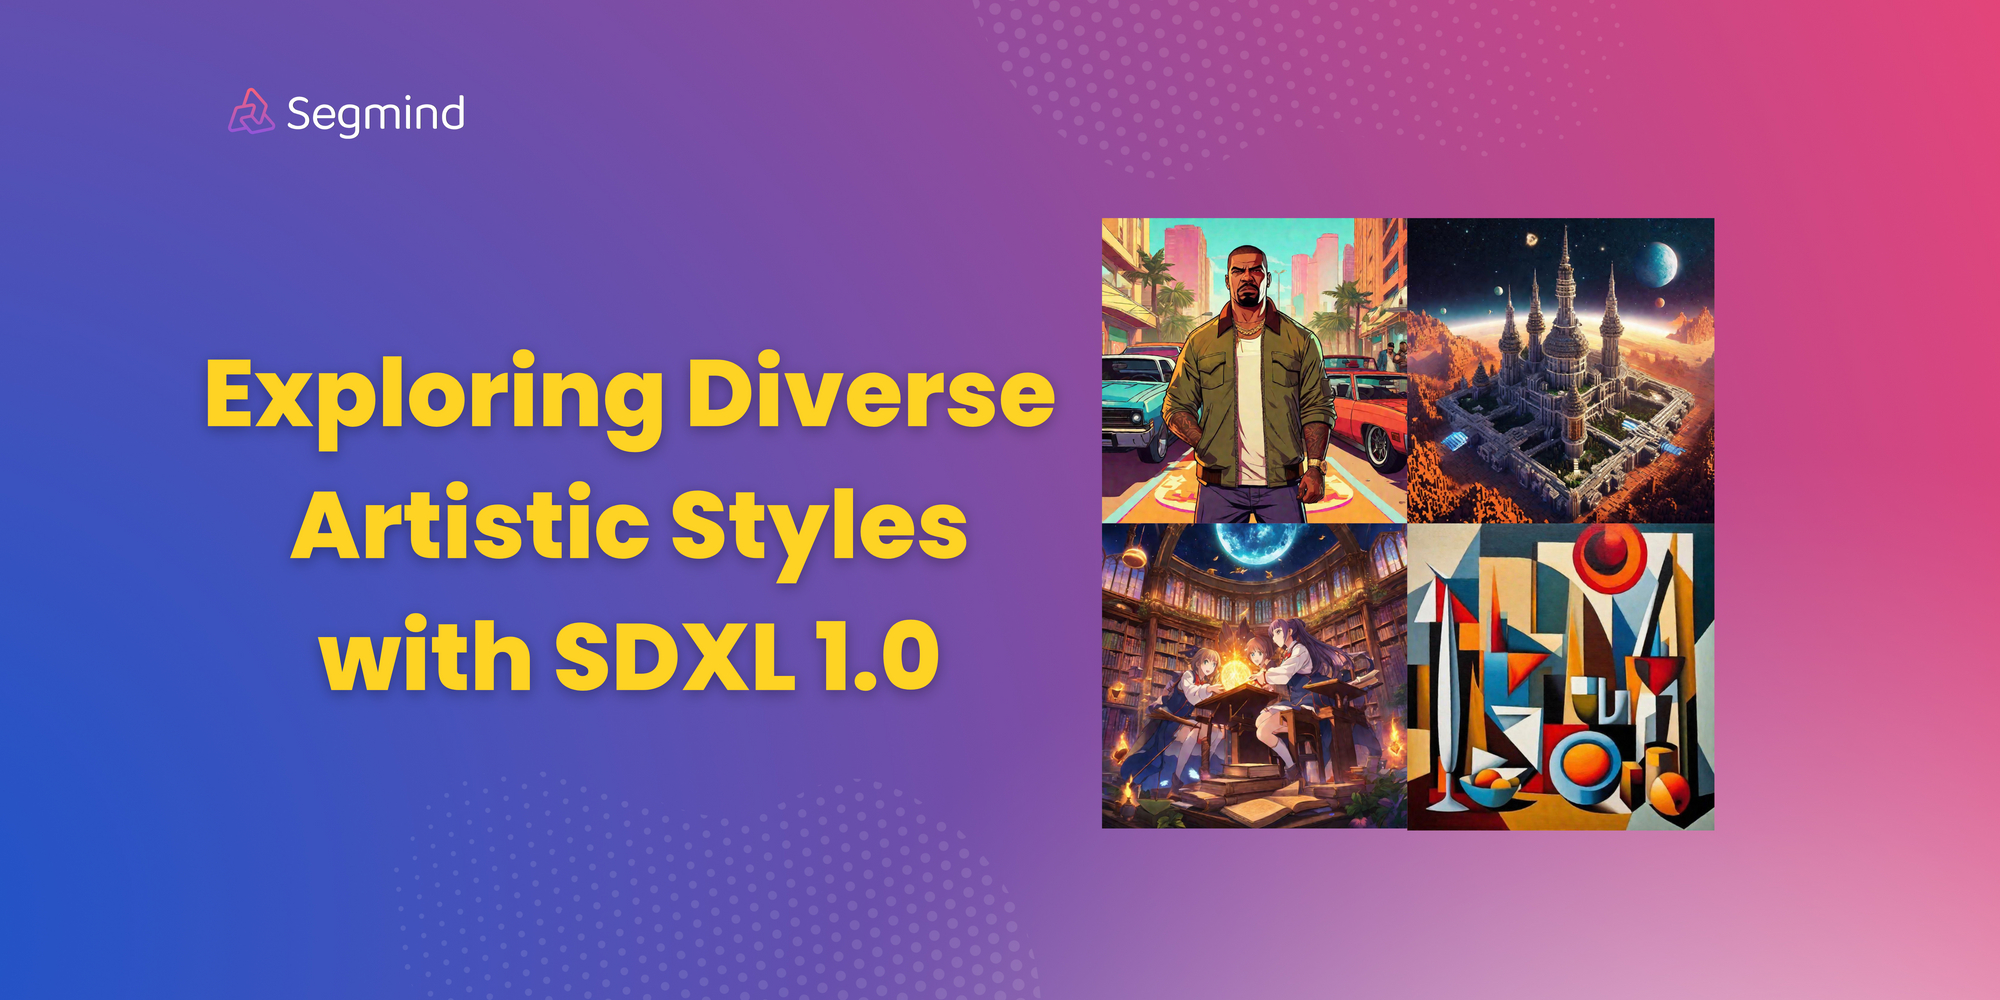 Exploring Diverse Artistic Styles with SDXL 1.0